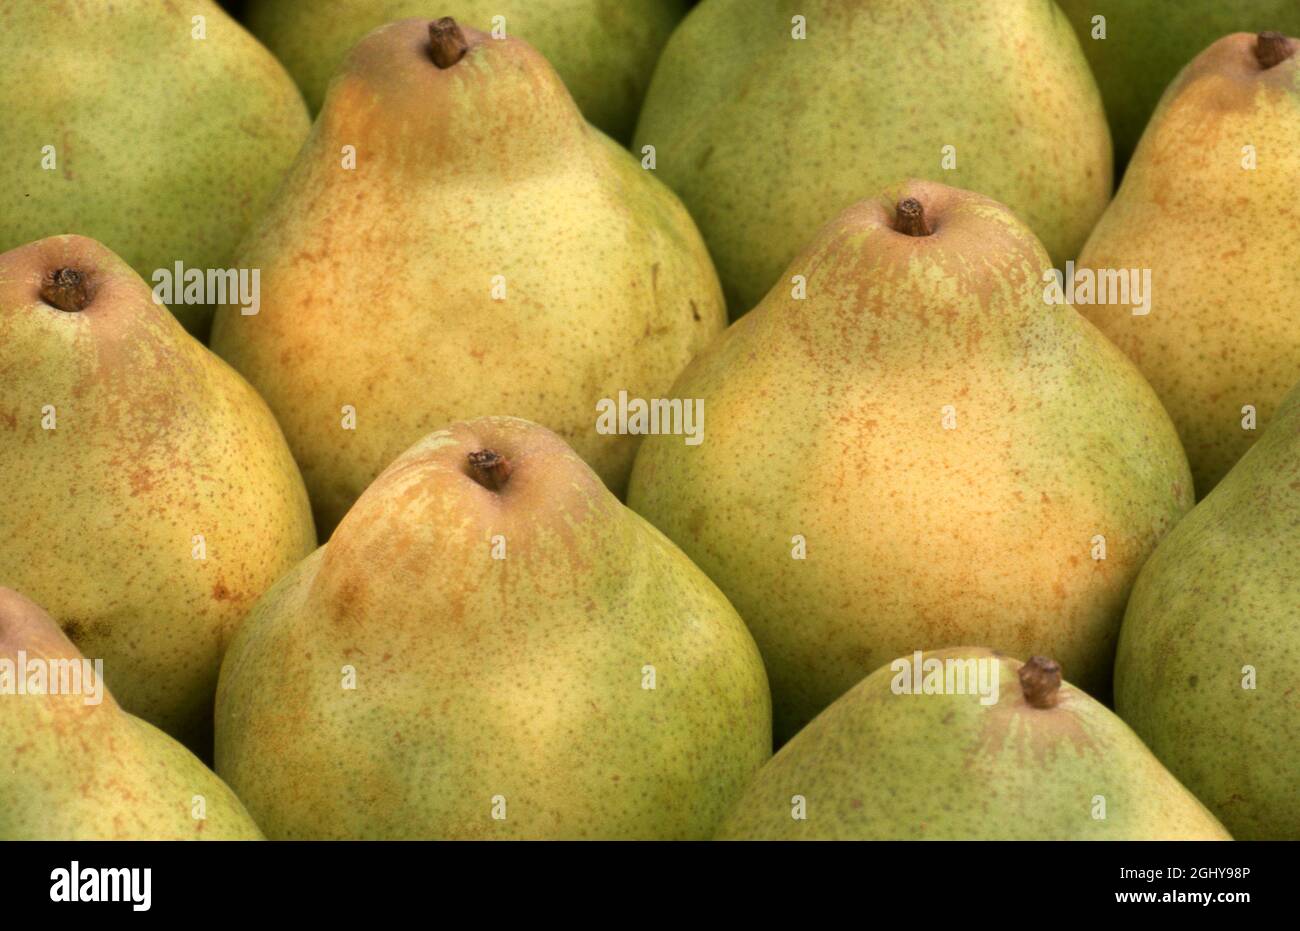 STUDIO IMAGE OF HARVESTED PEARS Stock Photo